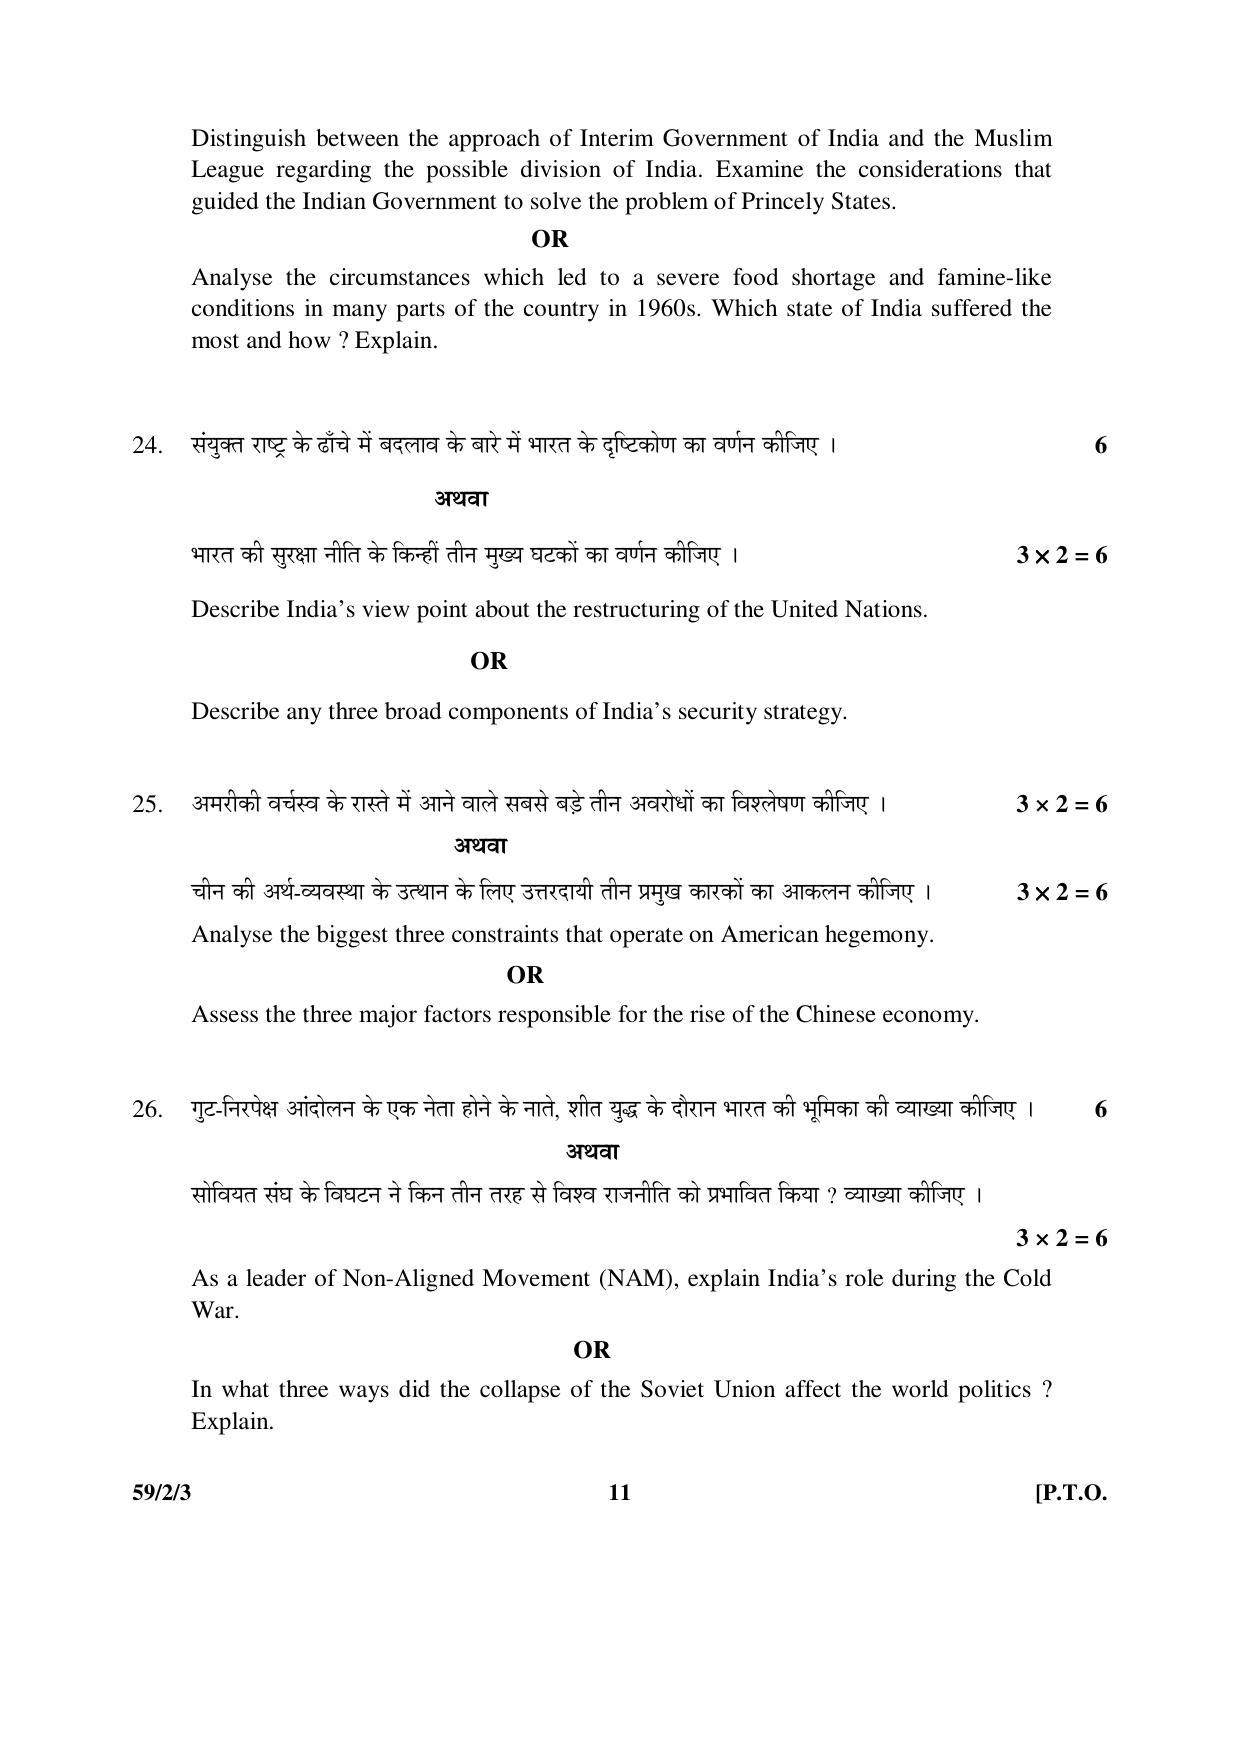 CBSE Class 12 59-2-3 _Political Science 2016 Question Paper - Page 11